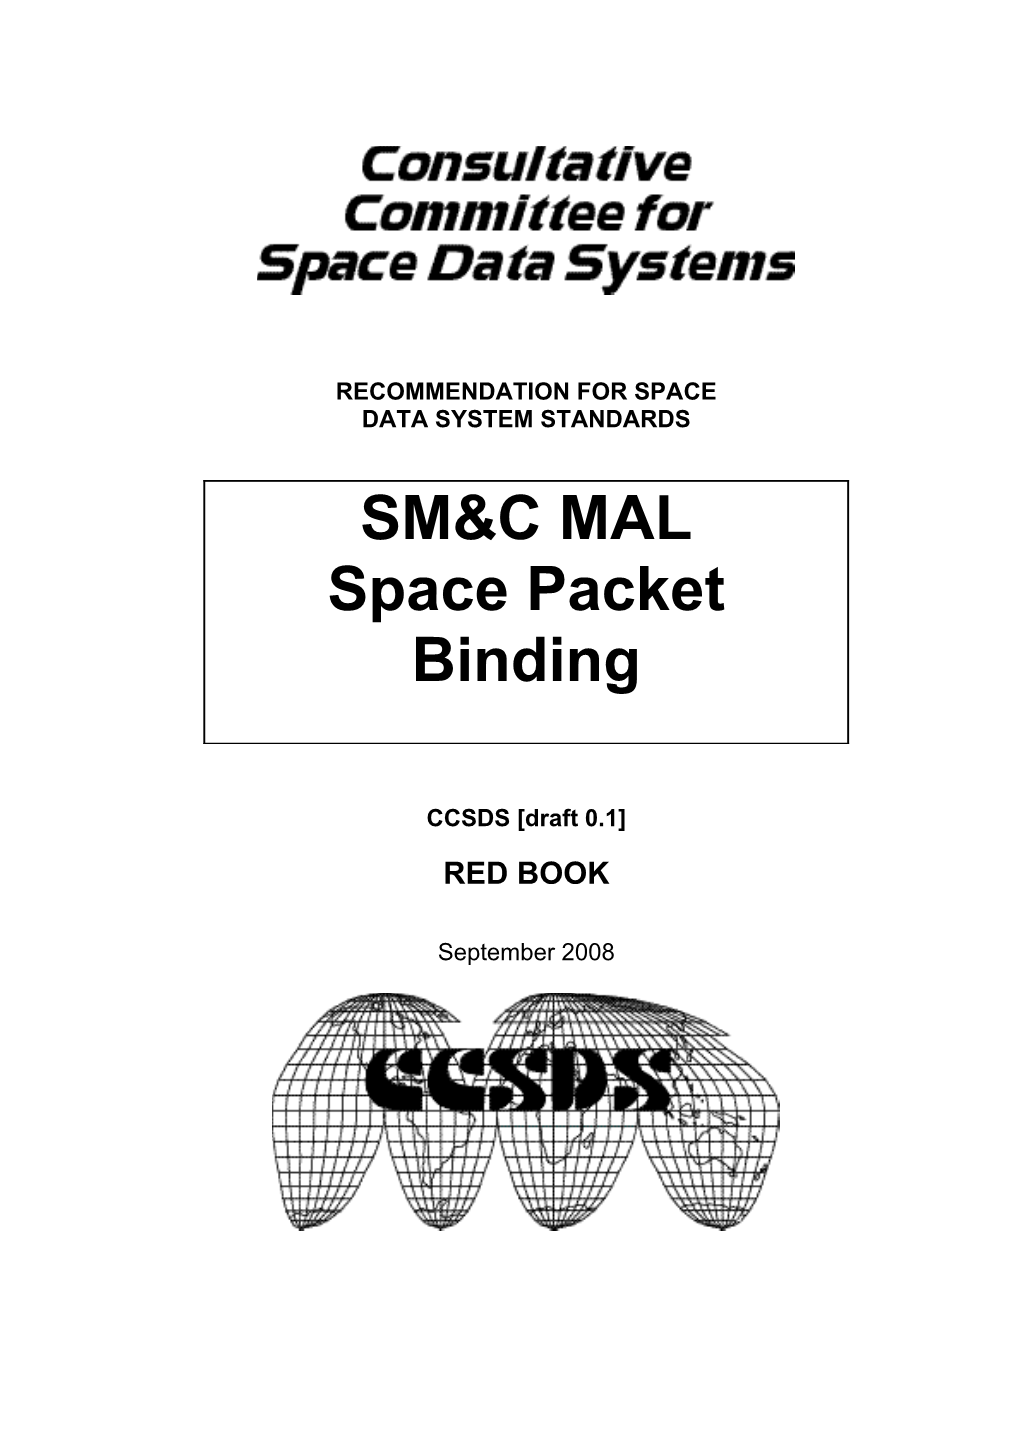 Ccsds Recommendation for Spacecraft Monitor